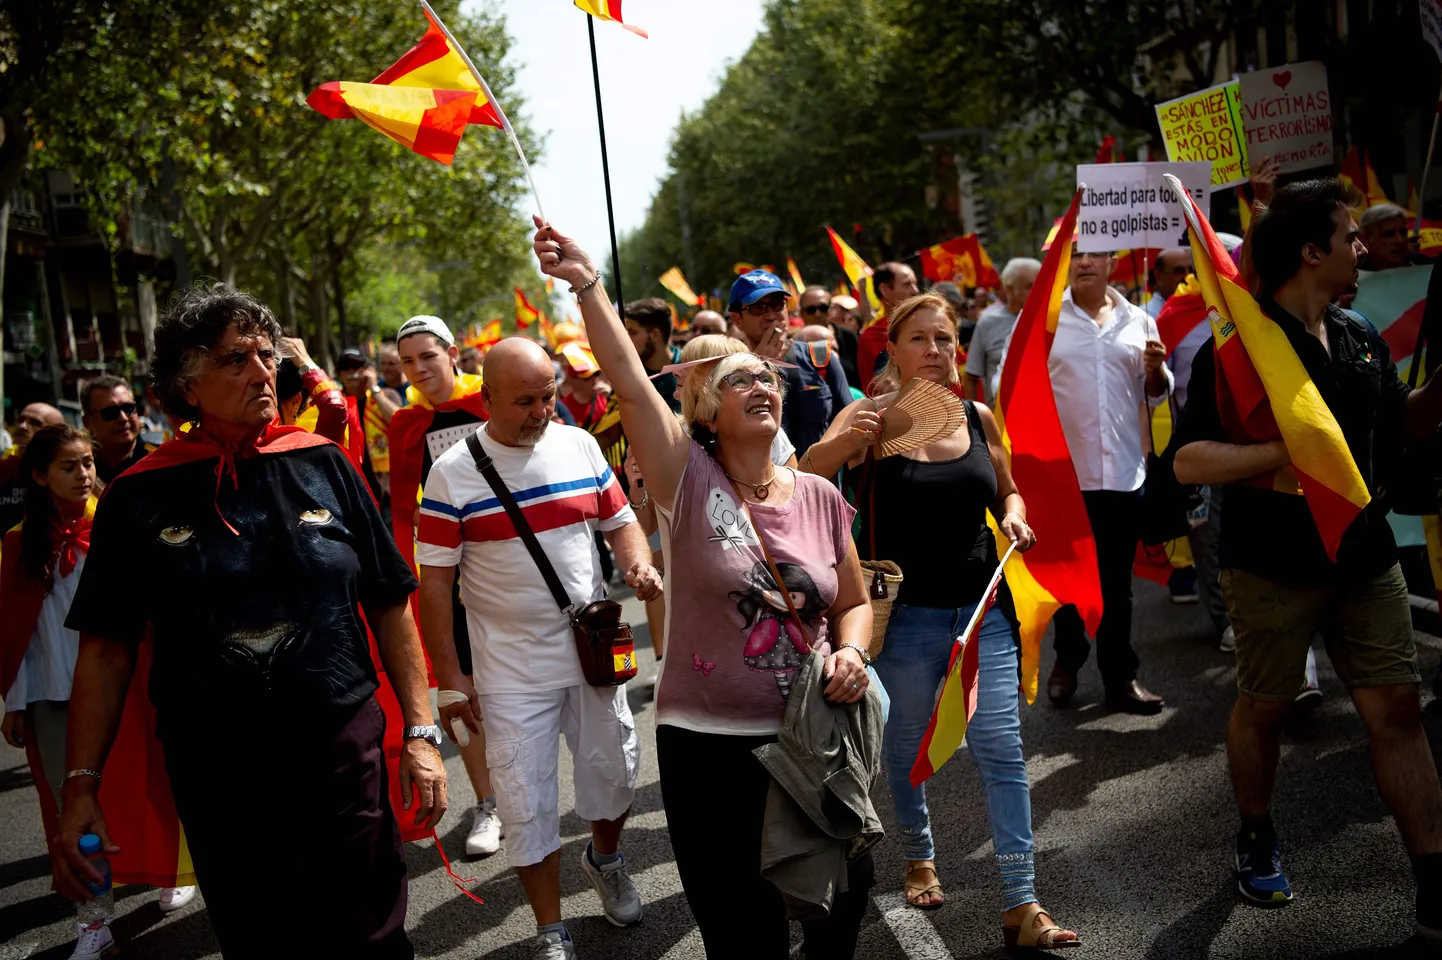 Protesters march during a demonstration against Catalan independence and in favor of Spanish unity in Barcelona on September 9, 2018. (Photo by Josep LAGO / AFP)